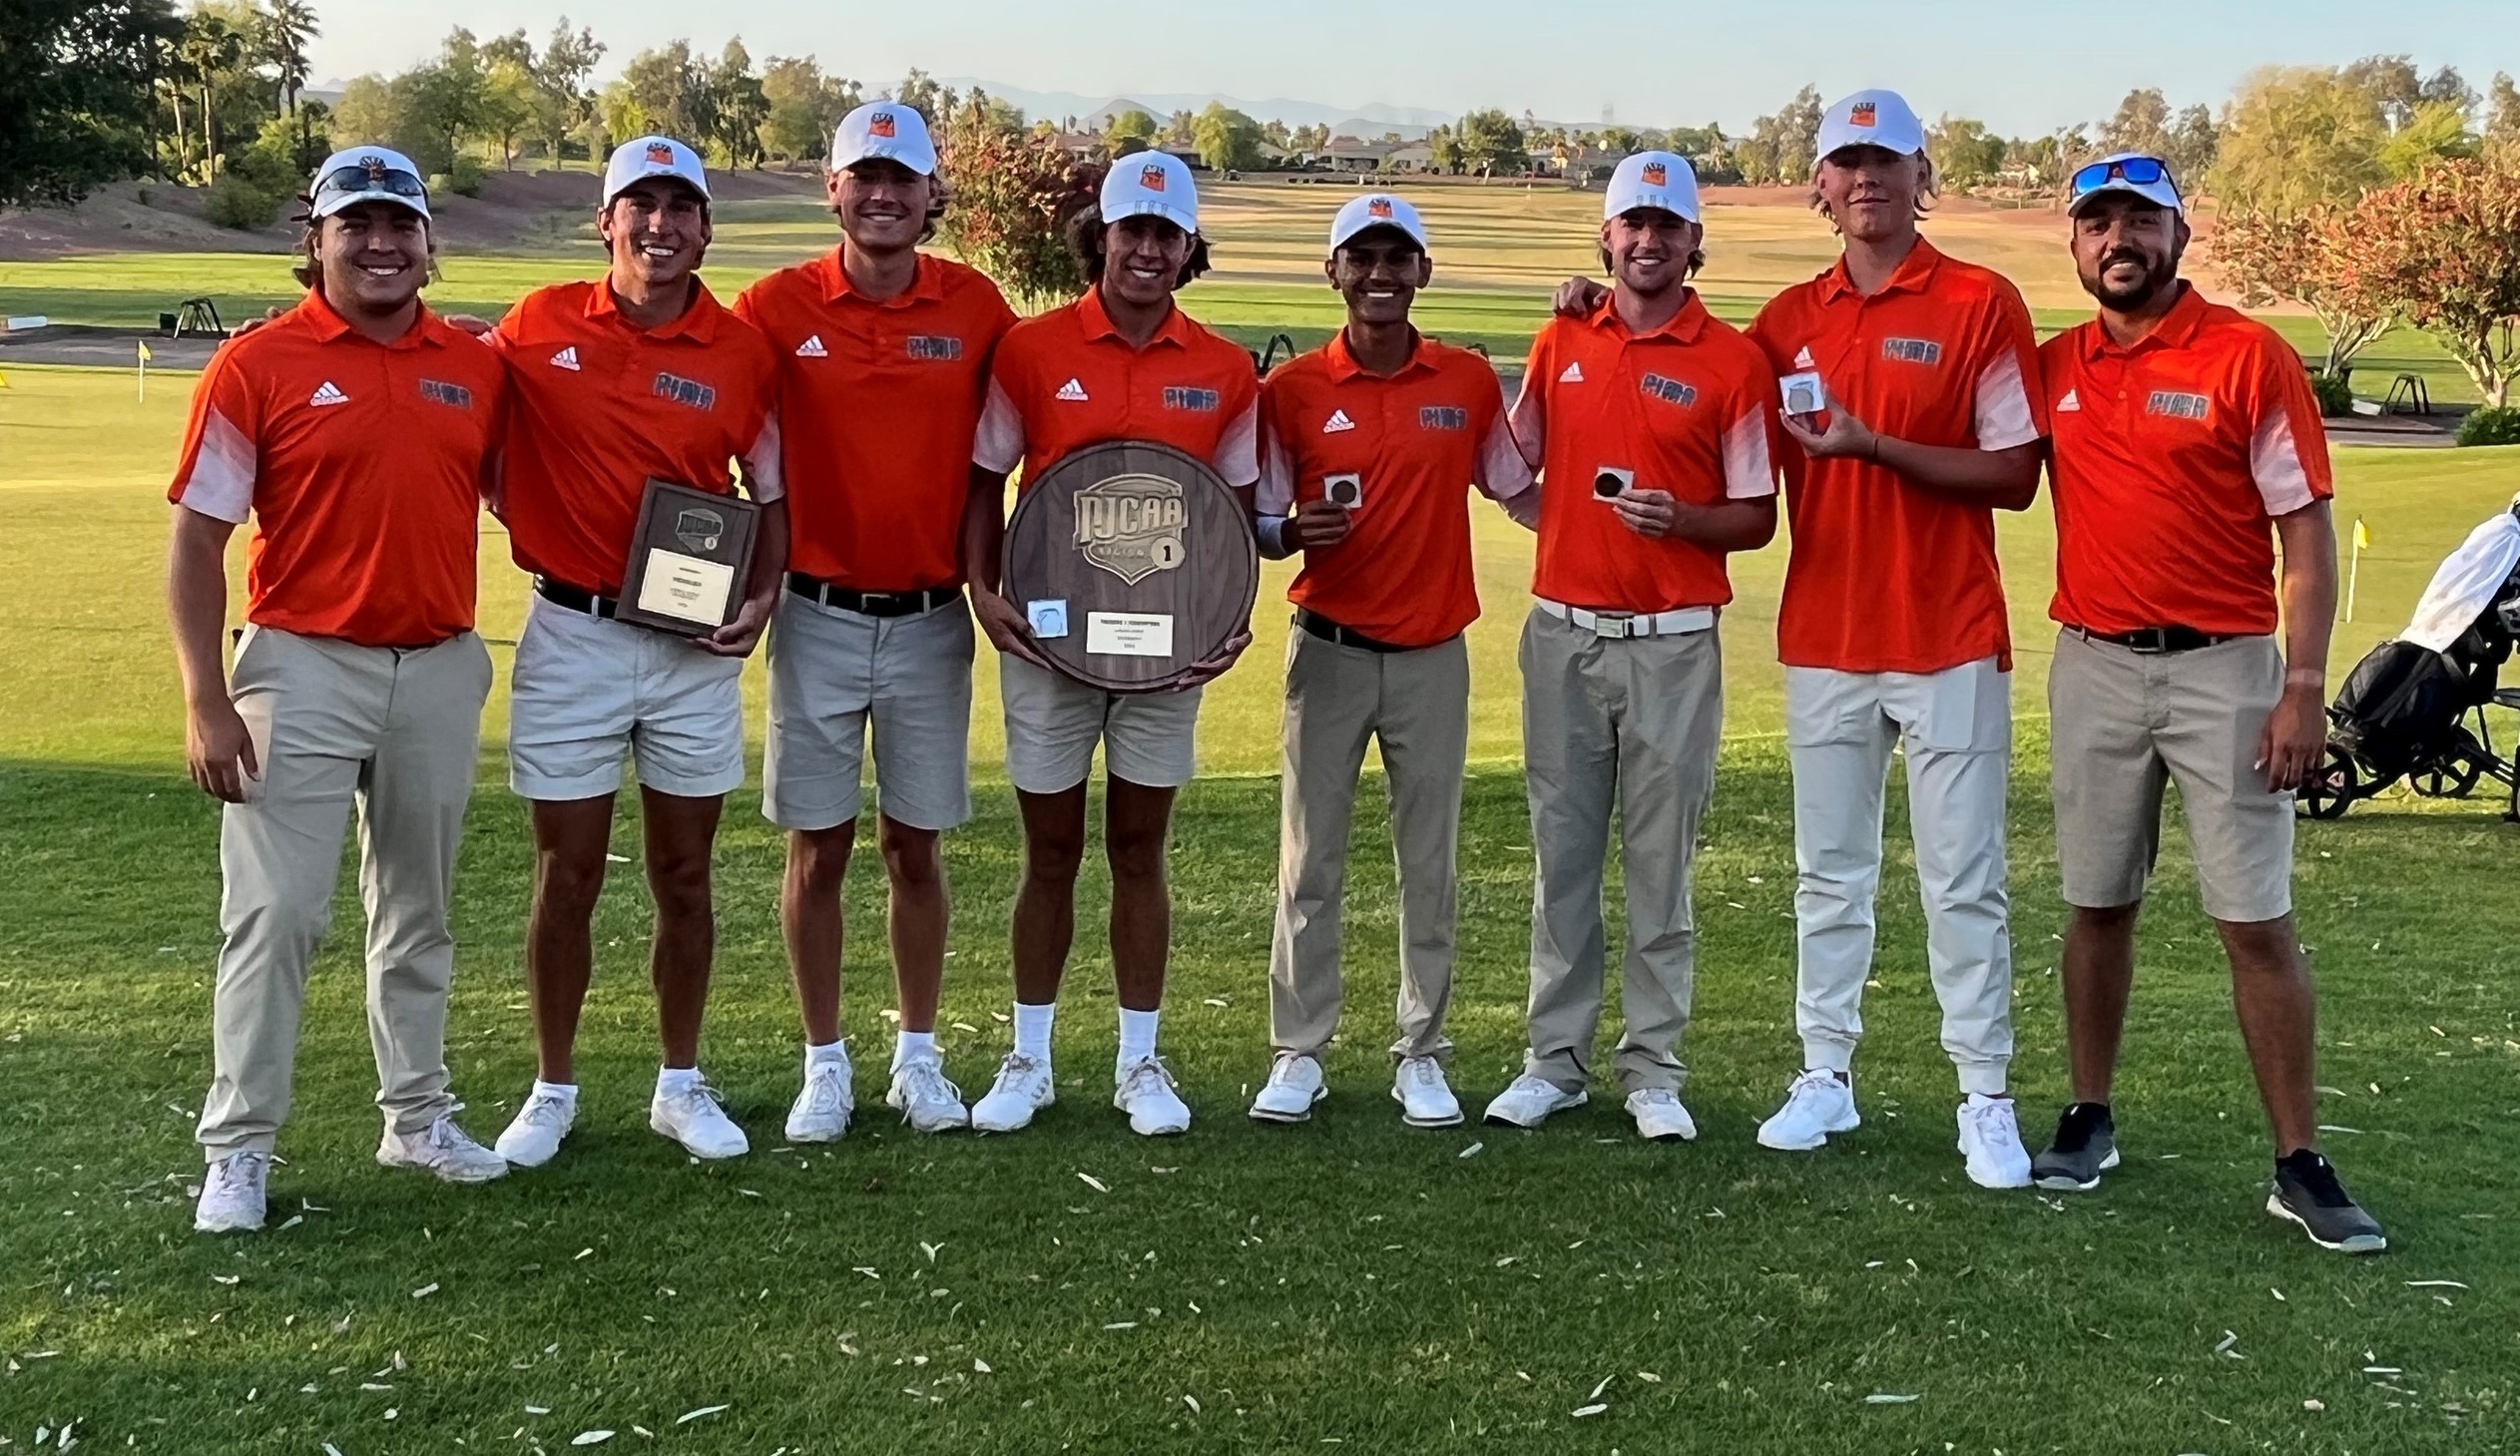 The Aztecs Men's Golf team captured the program's sixth NJCAA Region I, Division I Championship on Sunday at the Corte Bella Golf Course in Sun City West, AZ; the first for head coach Marcus Smith. The Aztecs took five of the seven spots in the All-Region Team. (Left To Right): Head Coach Marcus Smith, Jay Shero (Individual Champion), Caleb Knight, Daniel Henely (2nd place), AJ Quihuis (7th place), Tommy Rosenvall (6th place), Max Krueger (3rd place) and Assistant Coach Landyn Lewis/Photo by Raymond Suarez